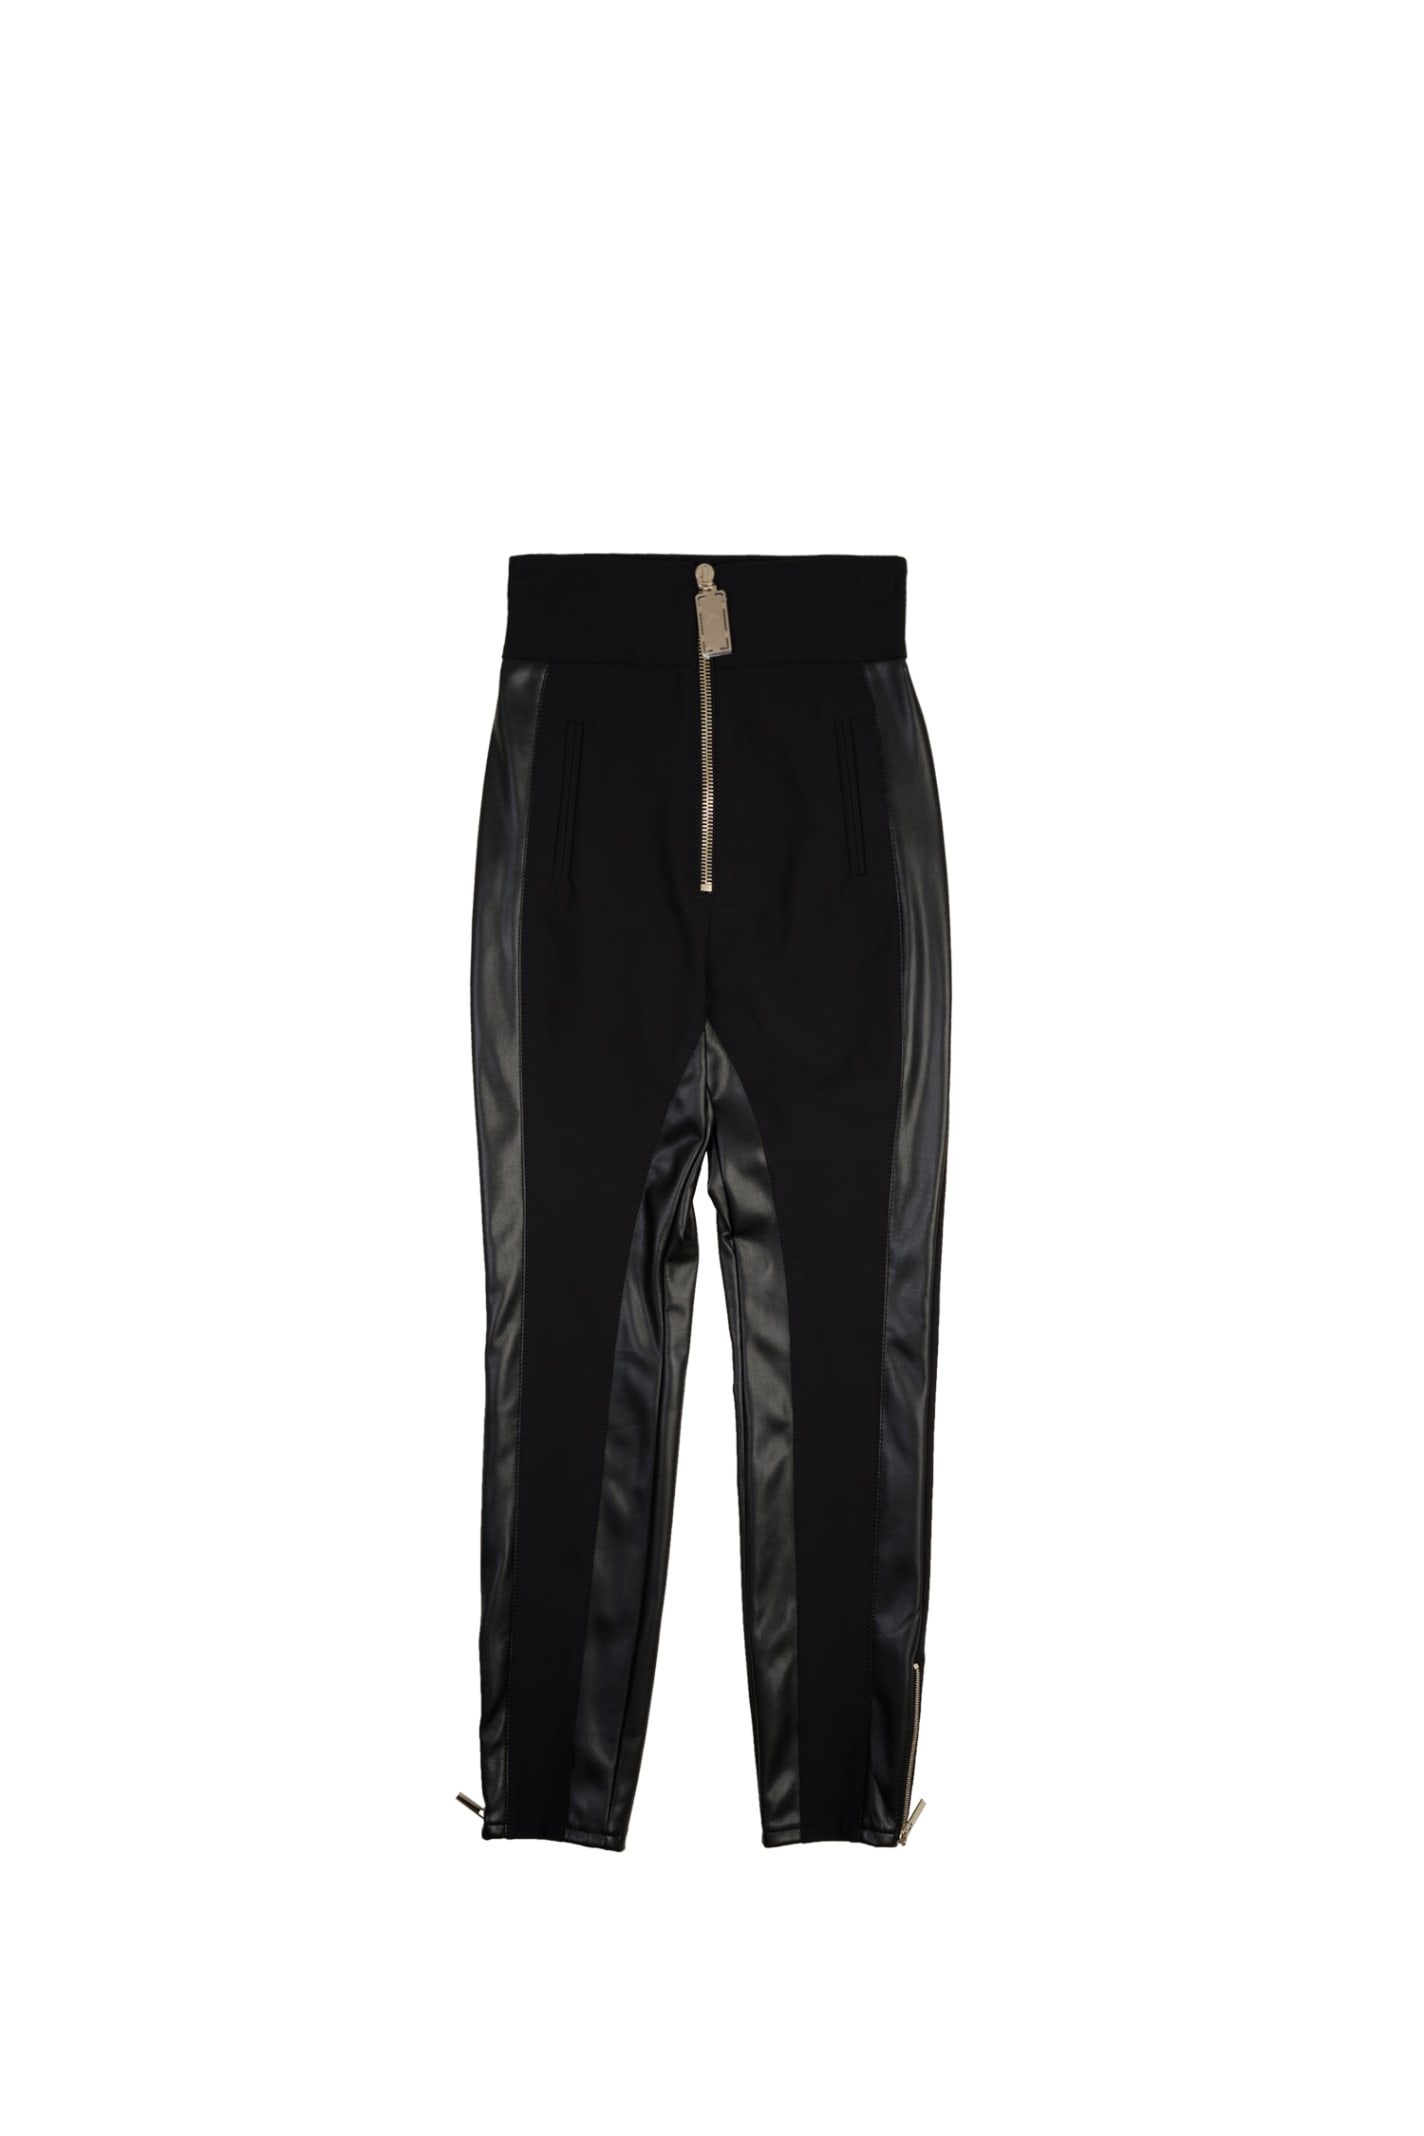 Elisabetta Franchi Faux Leather Equestrian Style Trousers